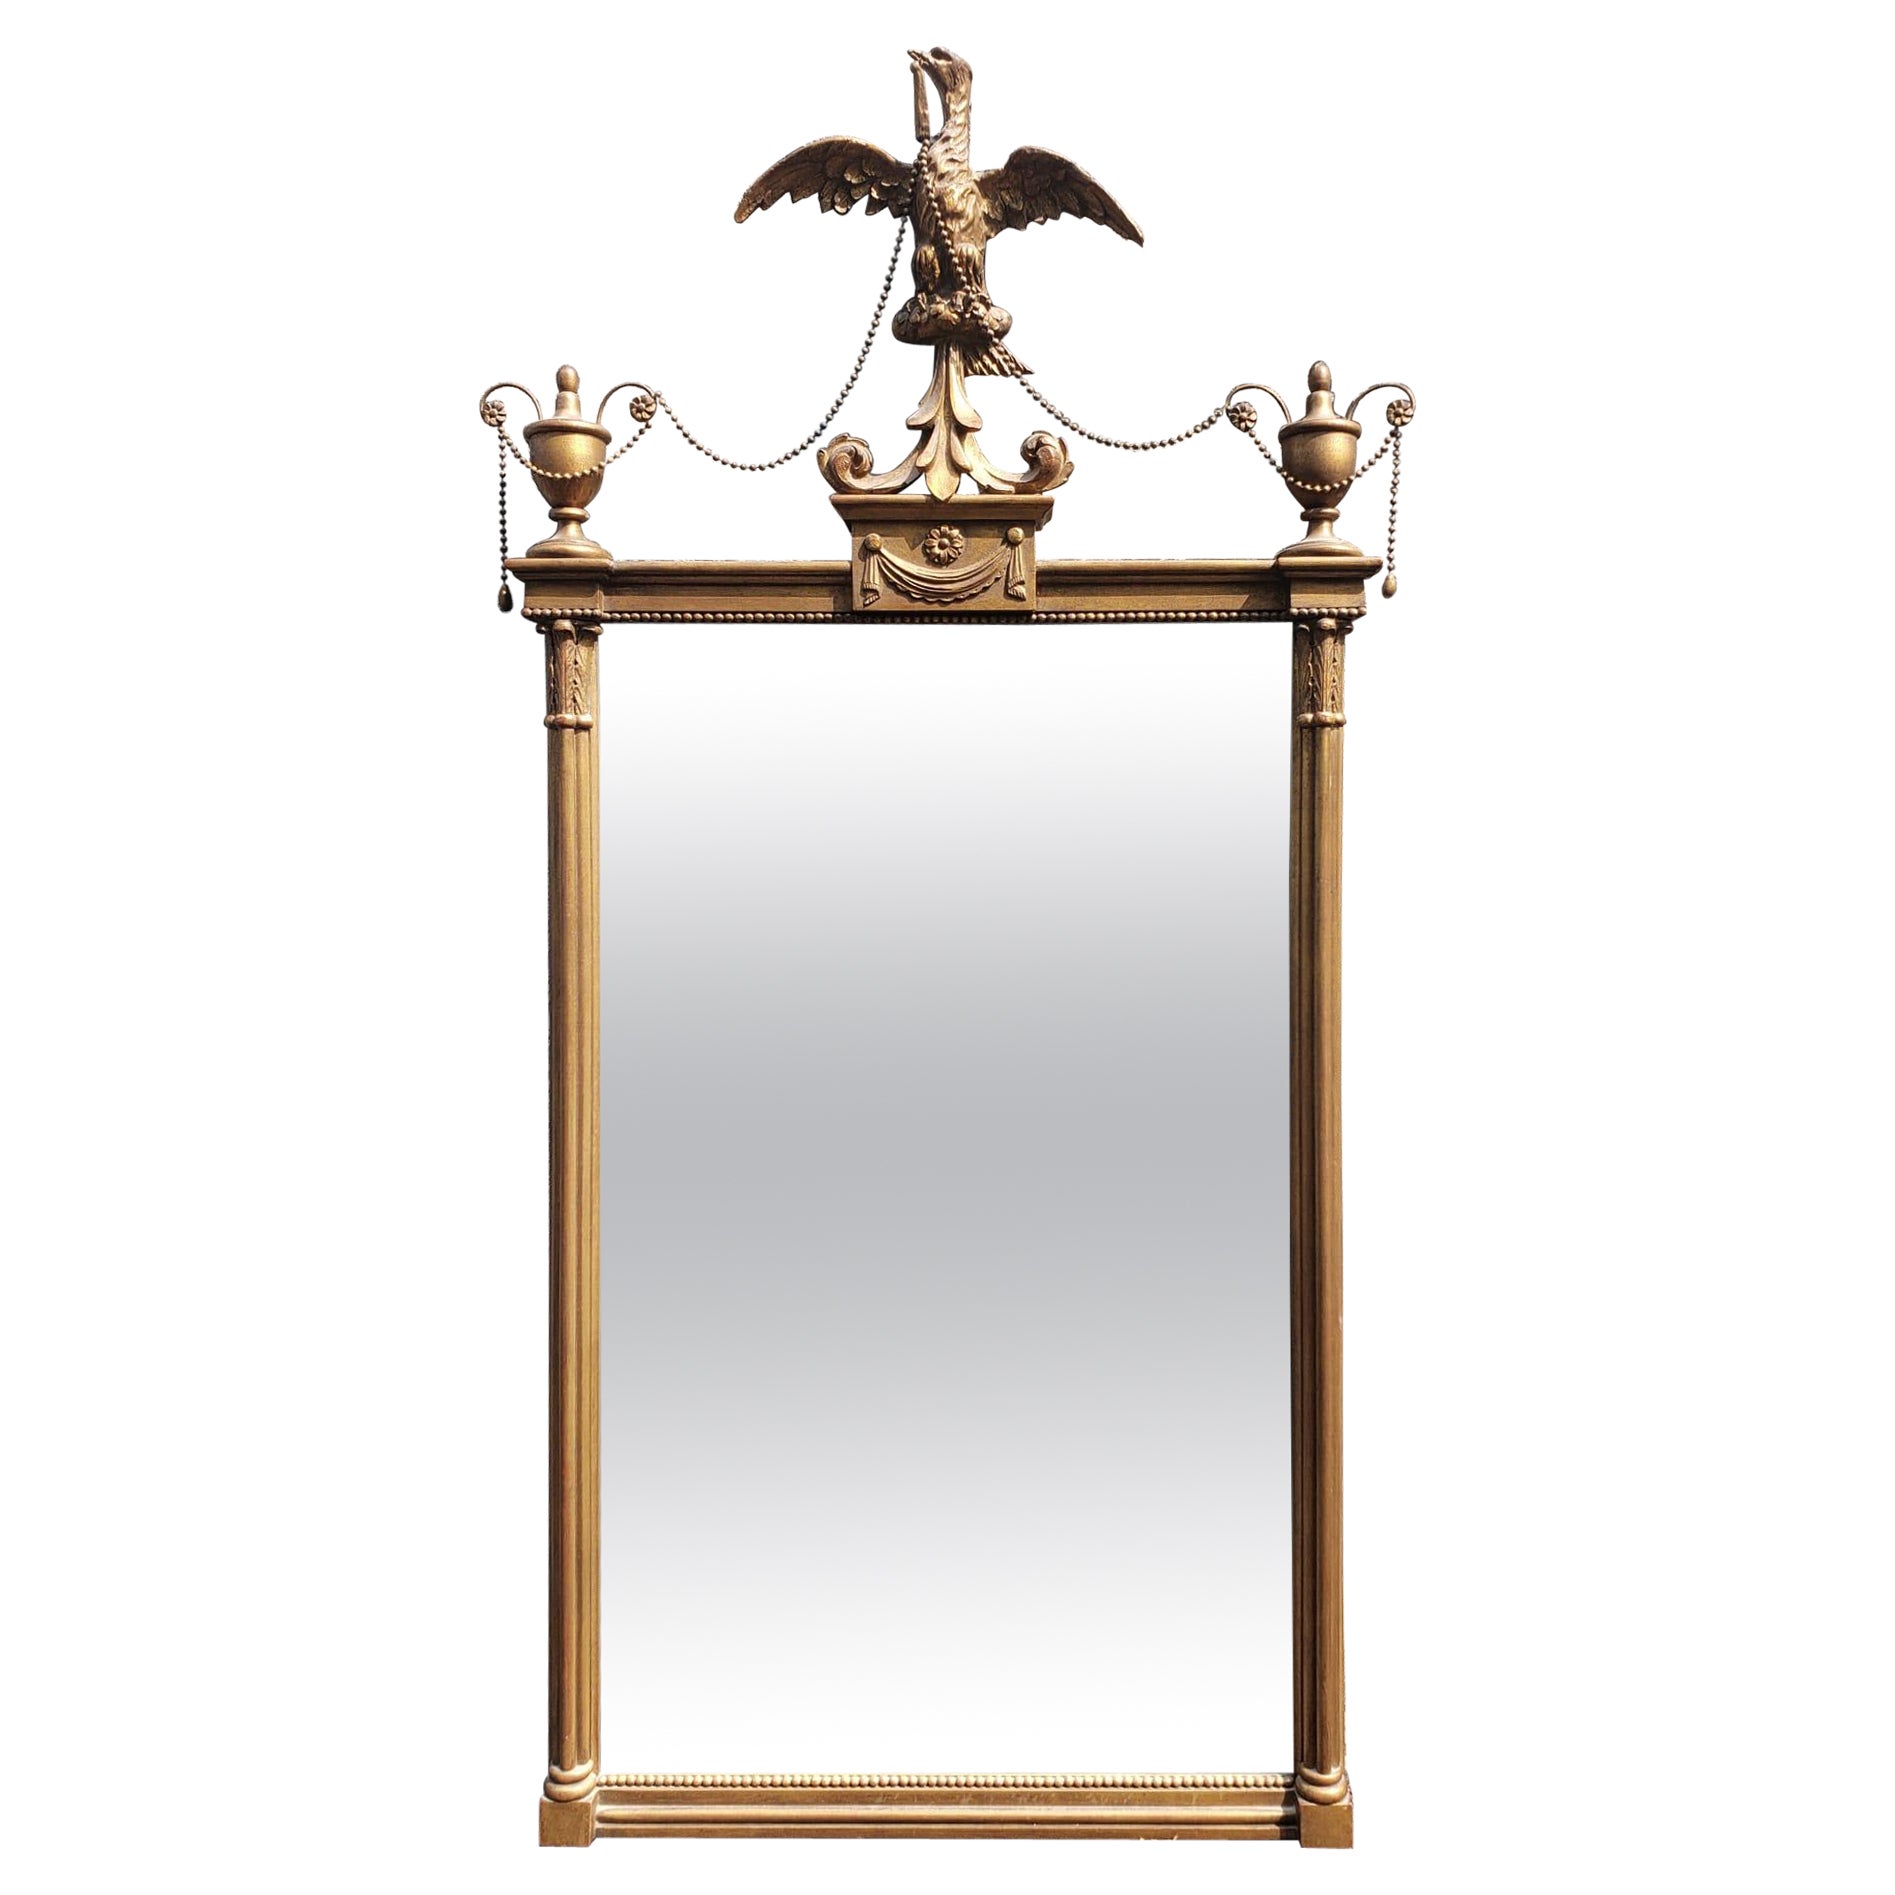 Early 20th Century Federal Style Gilt Decorated Eagle Pediment Frame Mirror For Sale